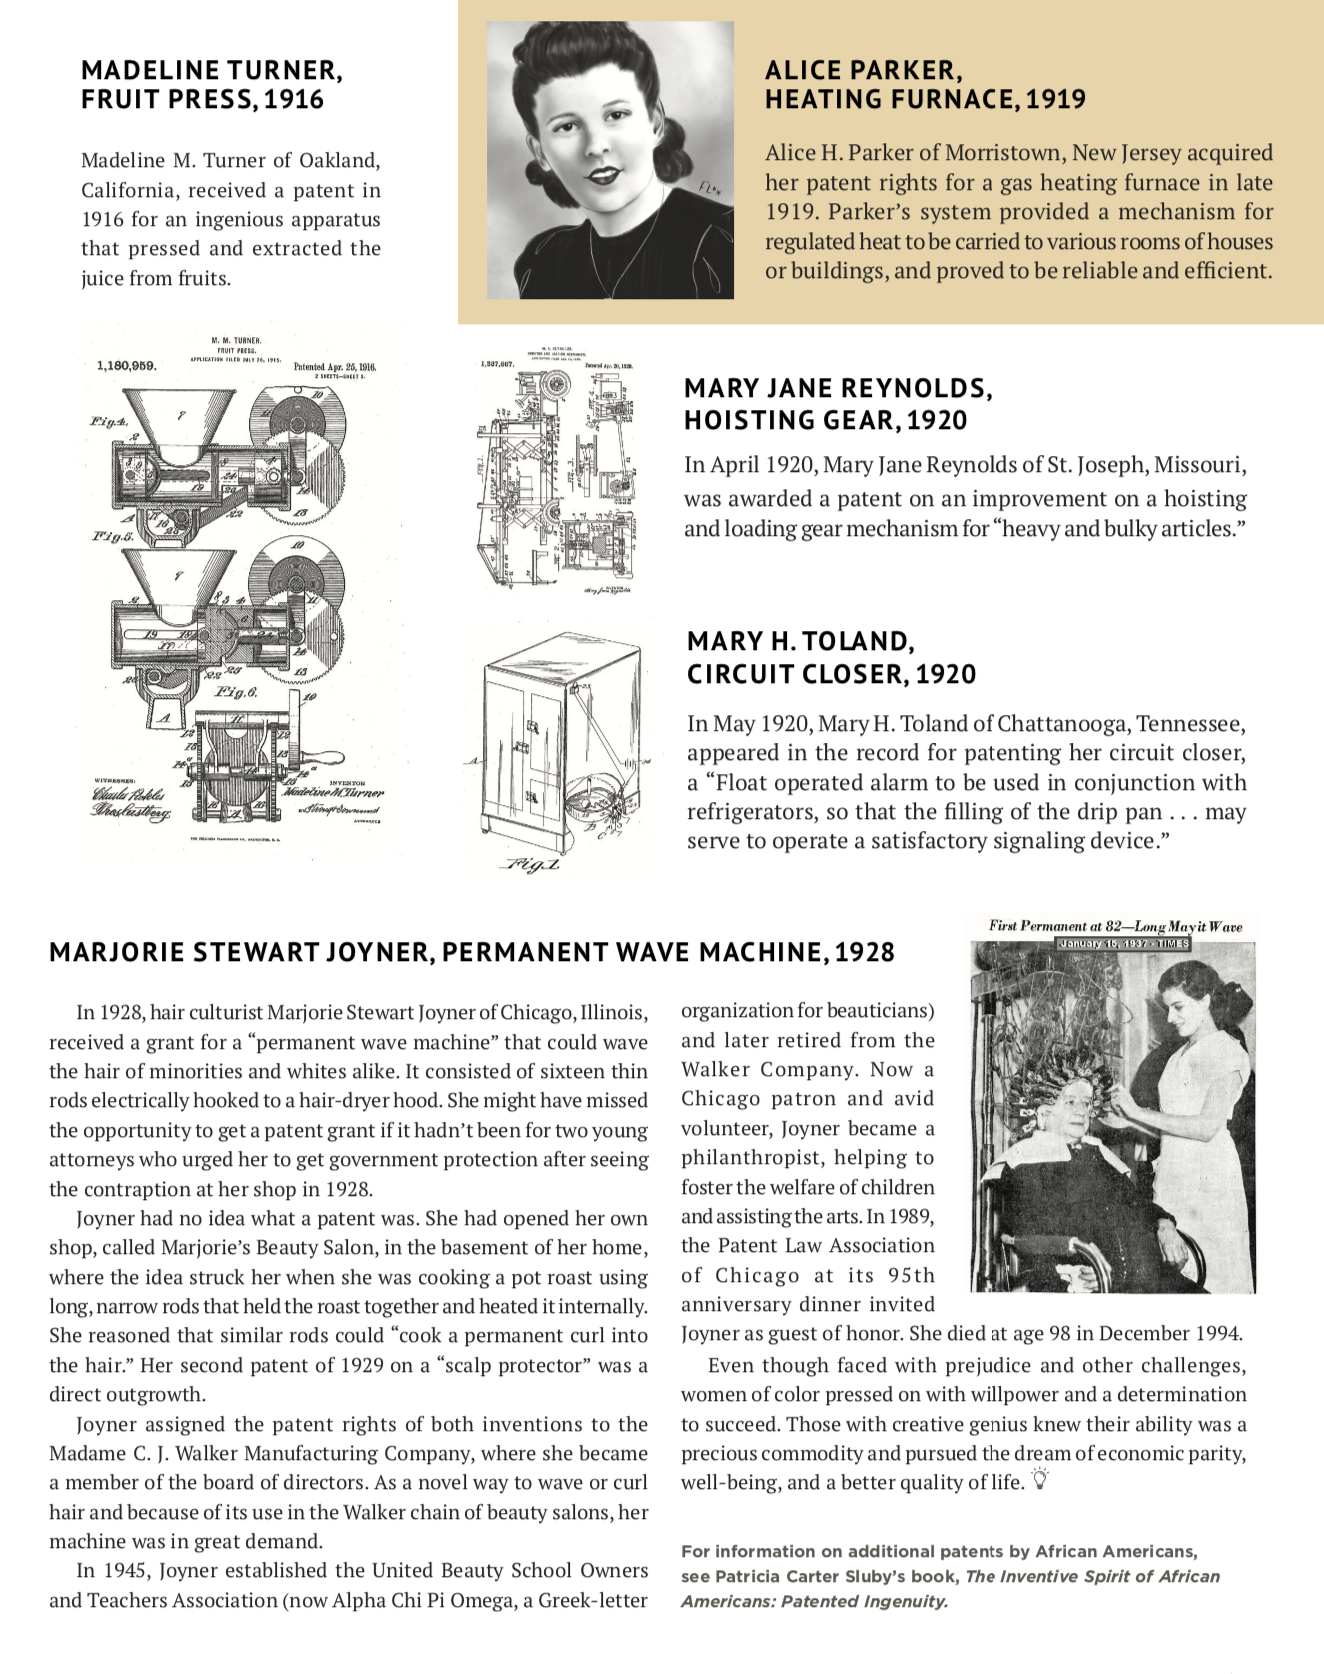 Illustrations of early women of color patent holders